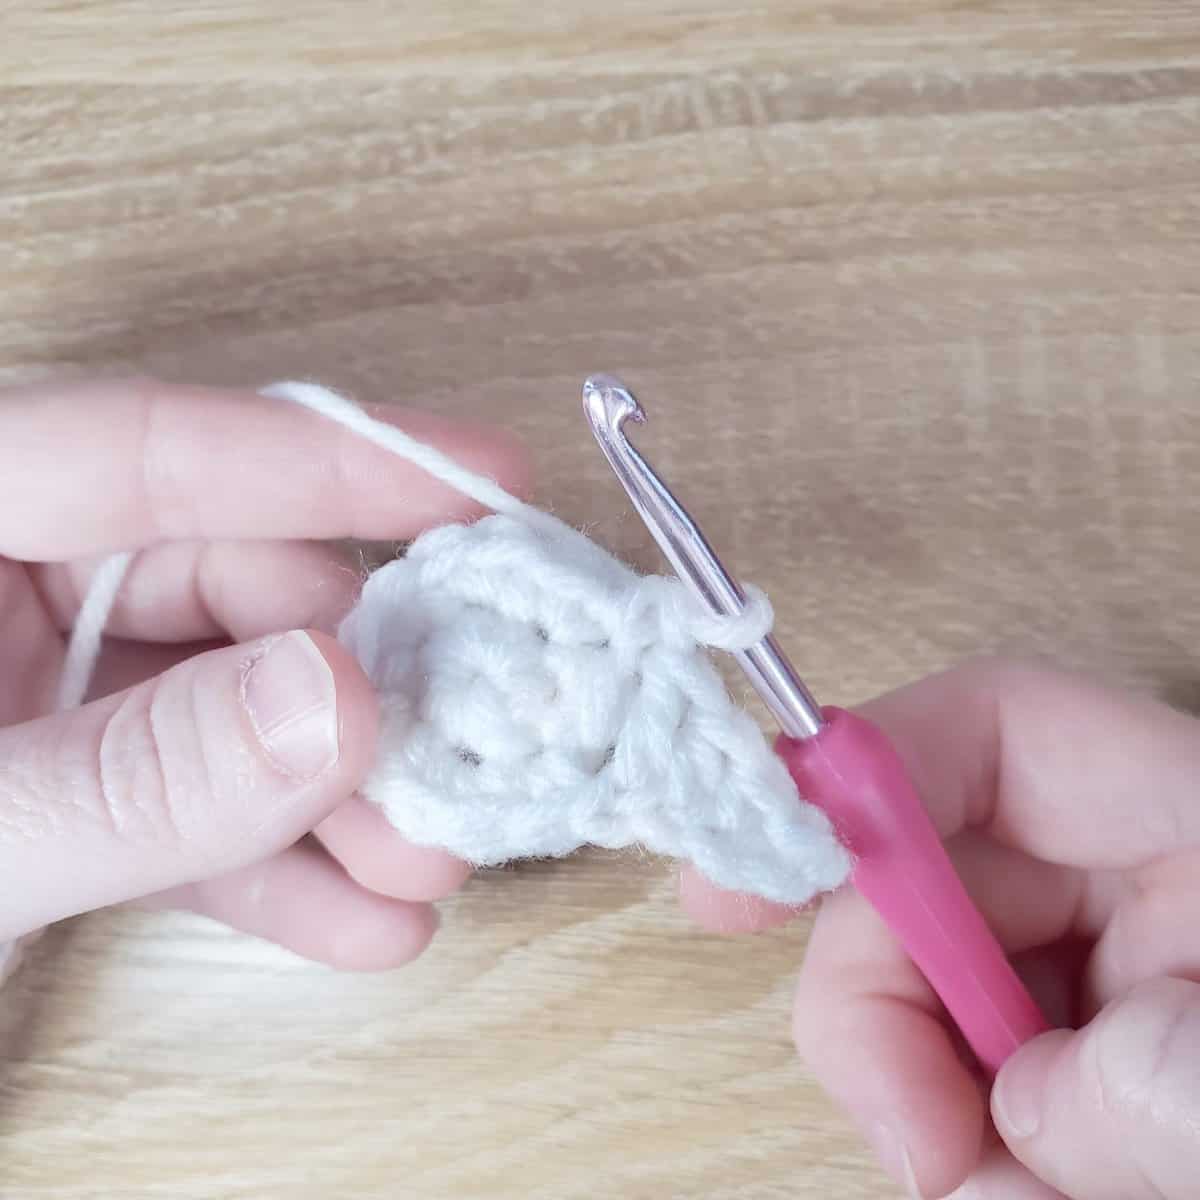 place a single crochet in the next stitch